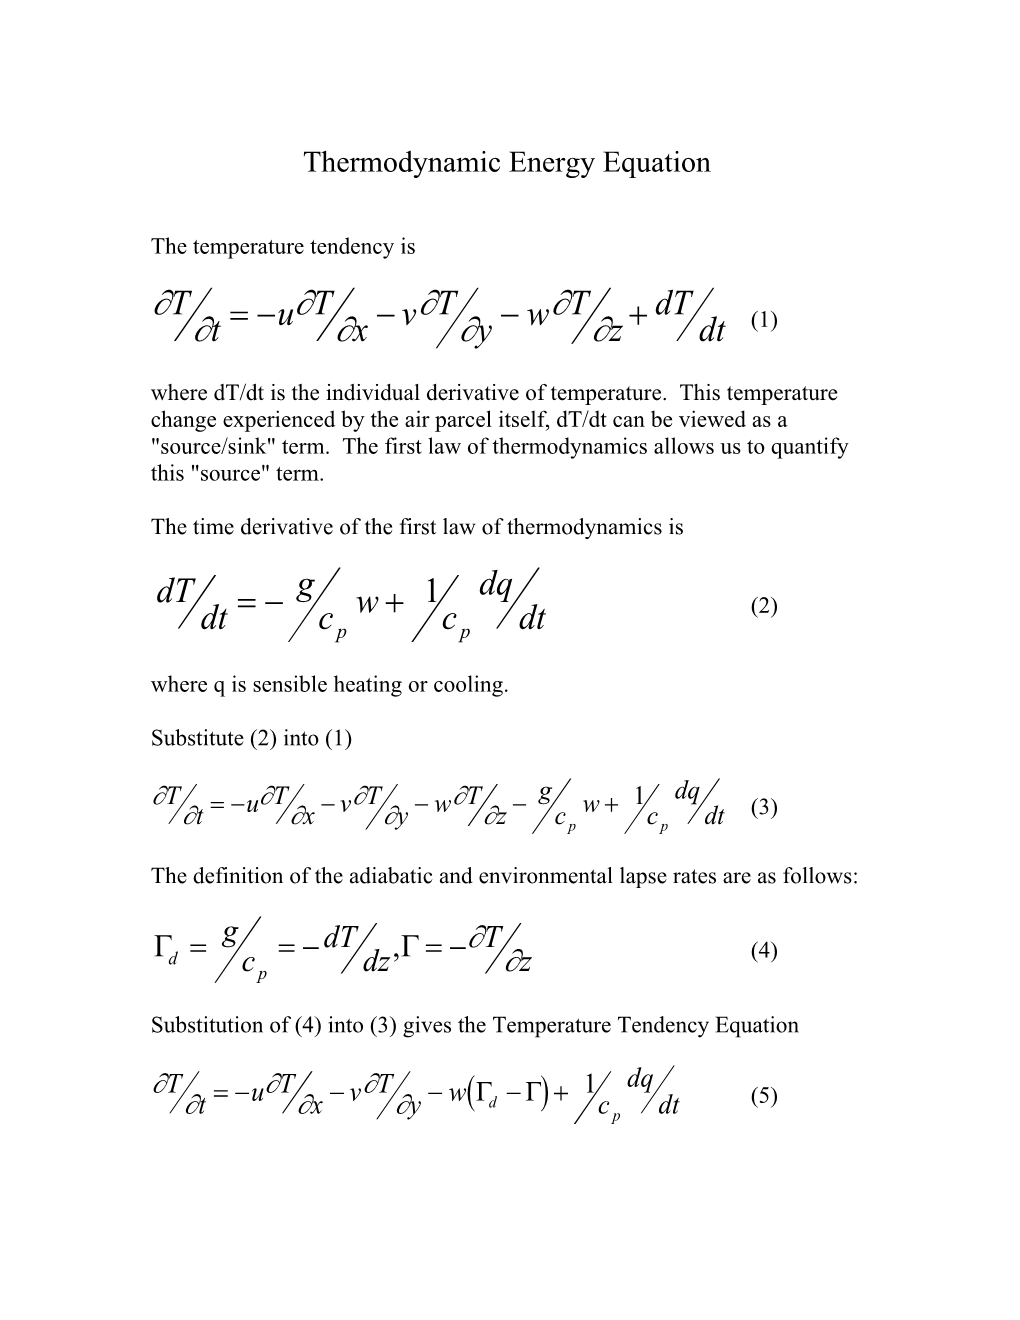 The Time Derivative of the First Law of Thermodynamics